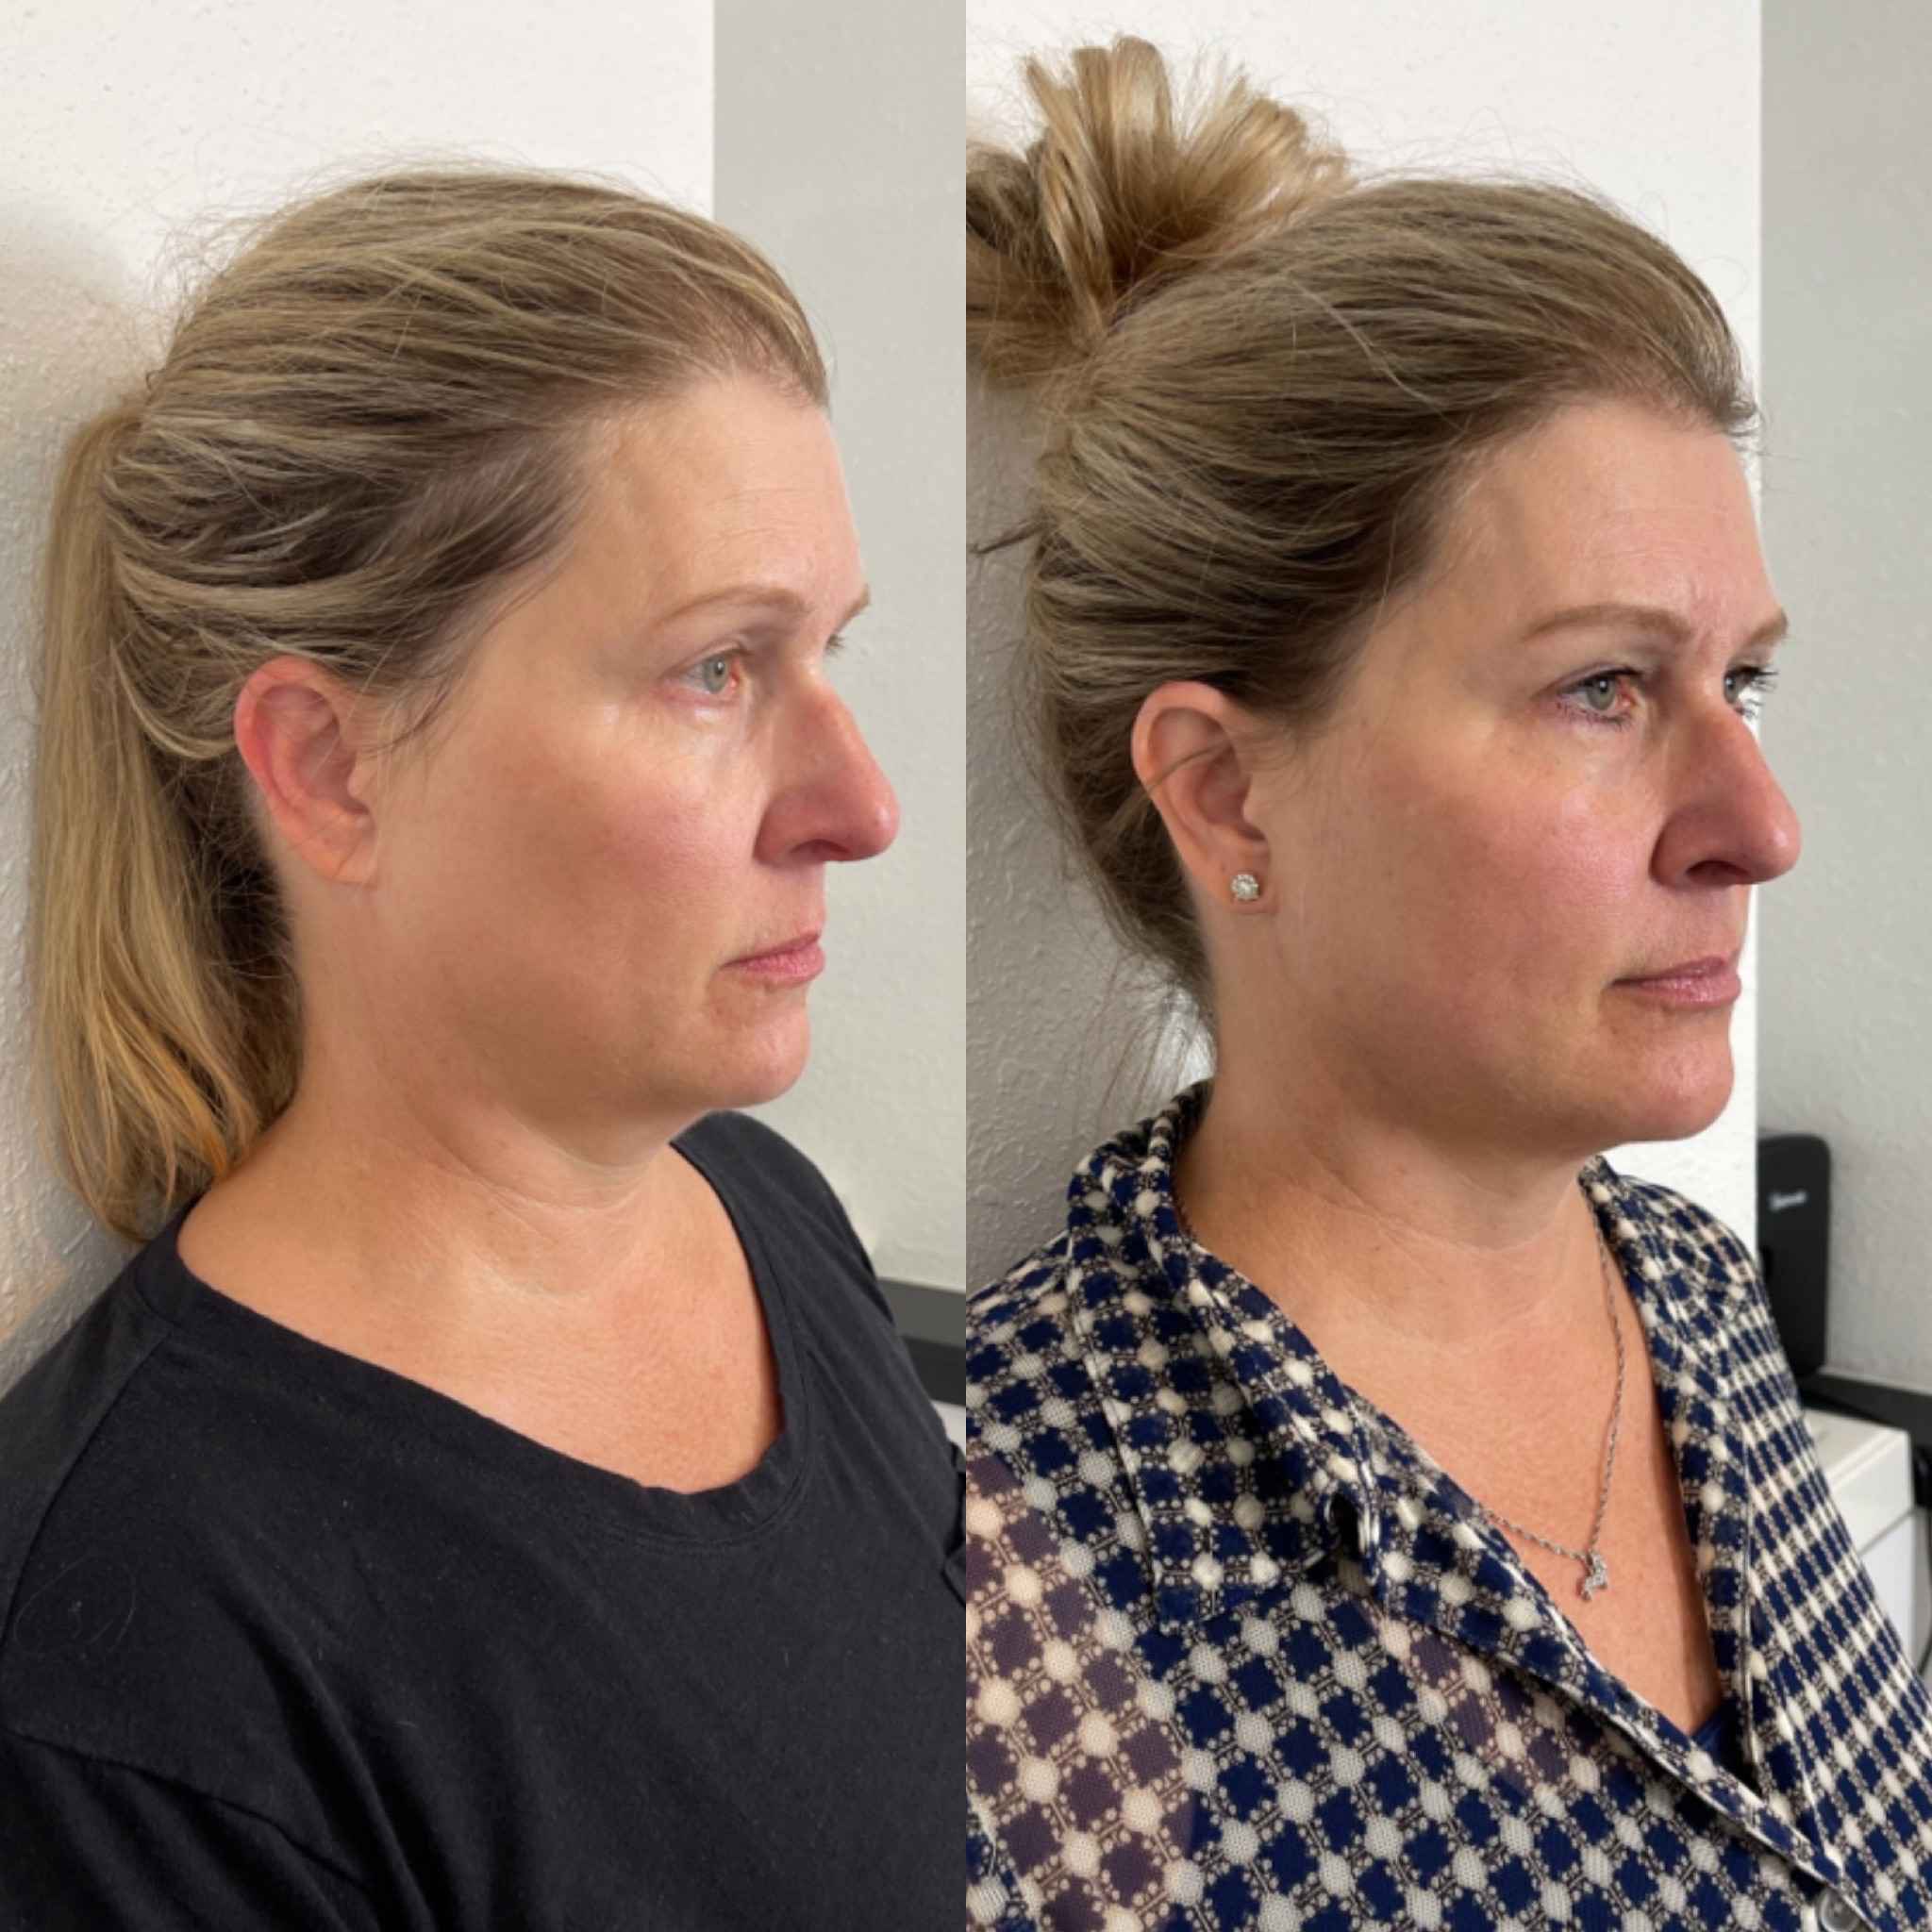 Before and After Changes by PDO Threads treatment | Onyx Medical Aesthetics | Homann Dr. S.E. suite B Lacey, WA